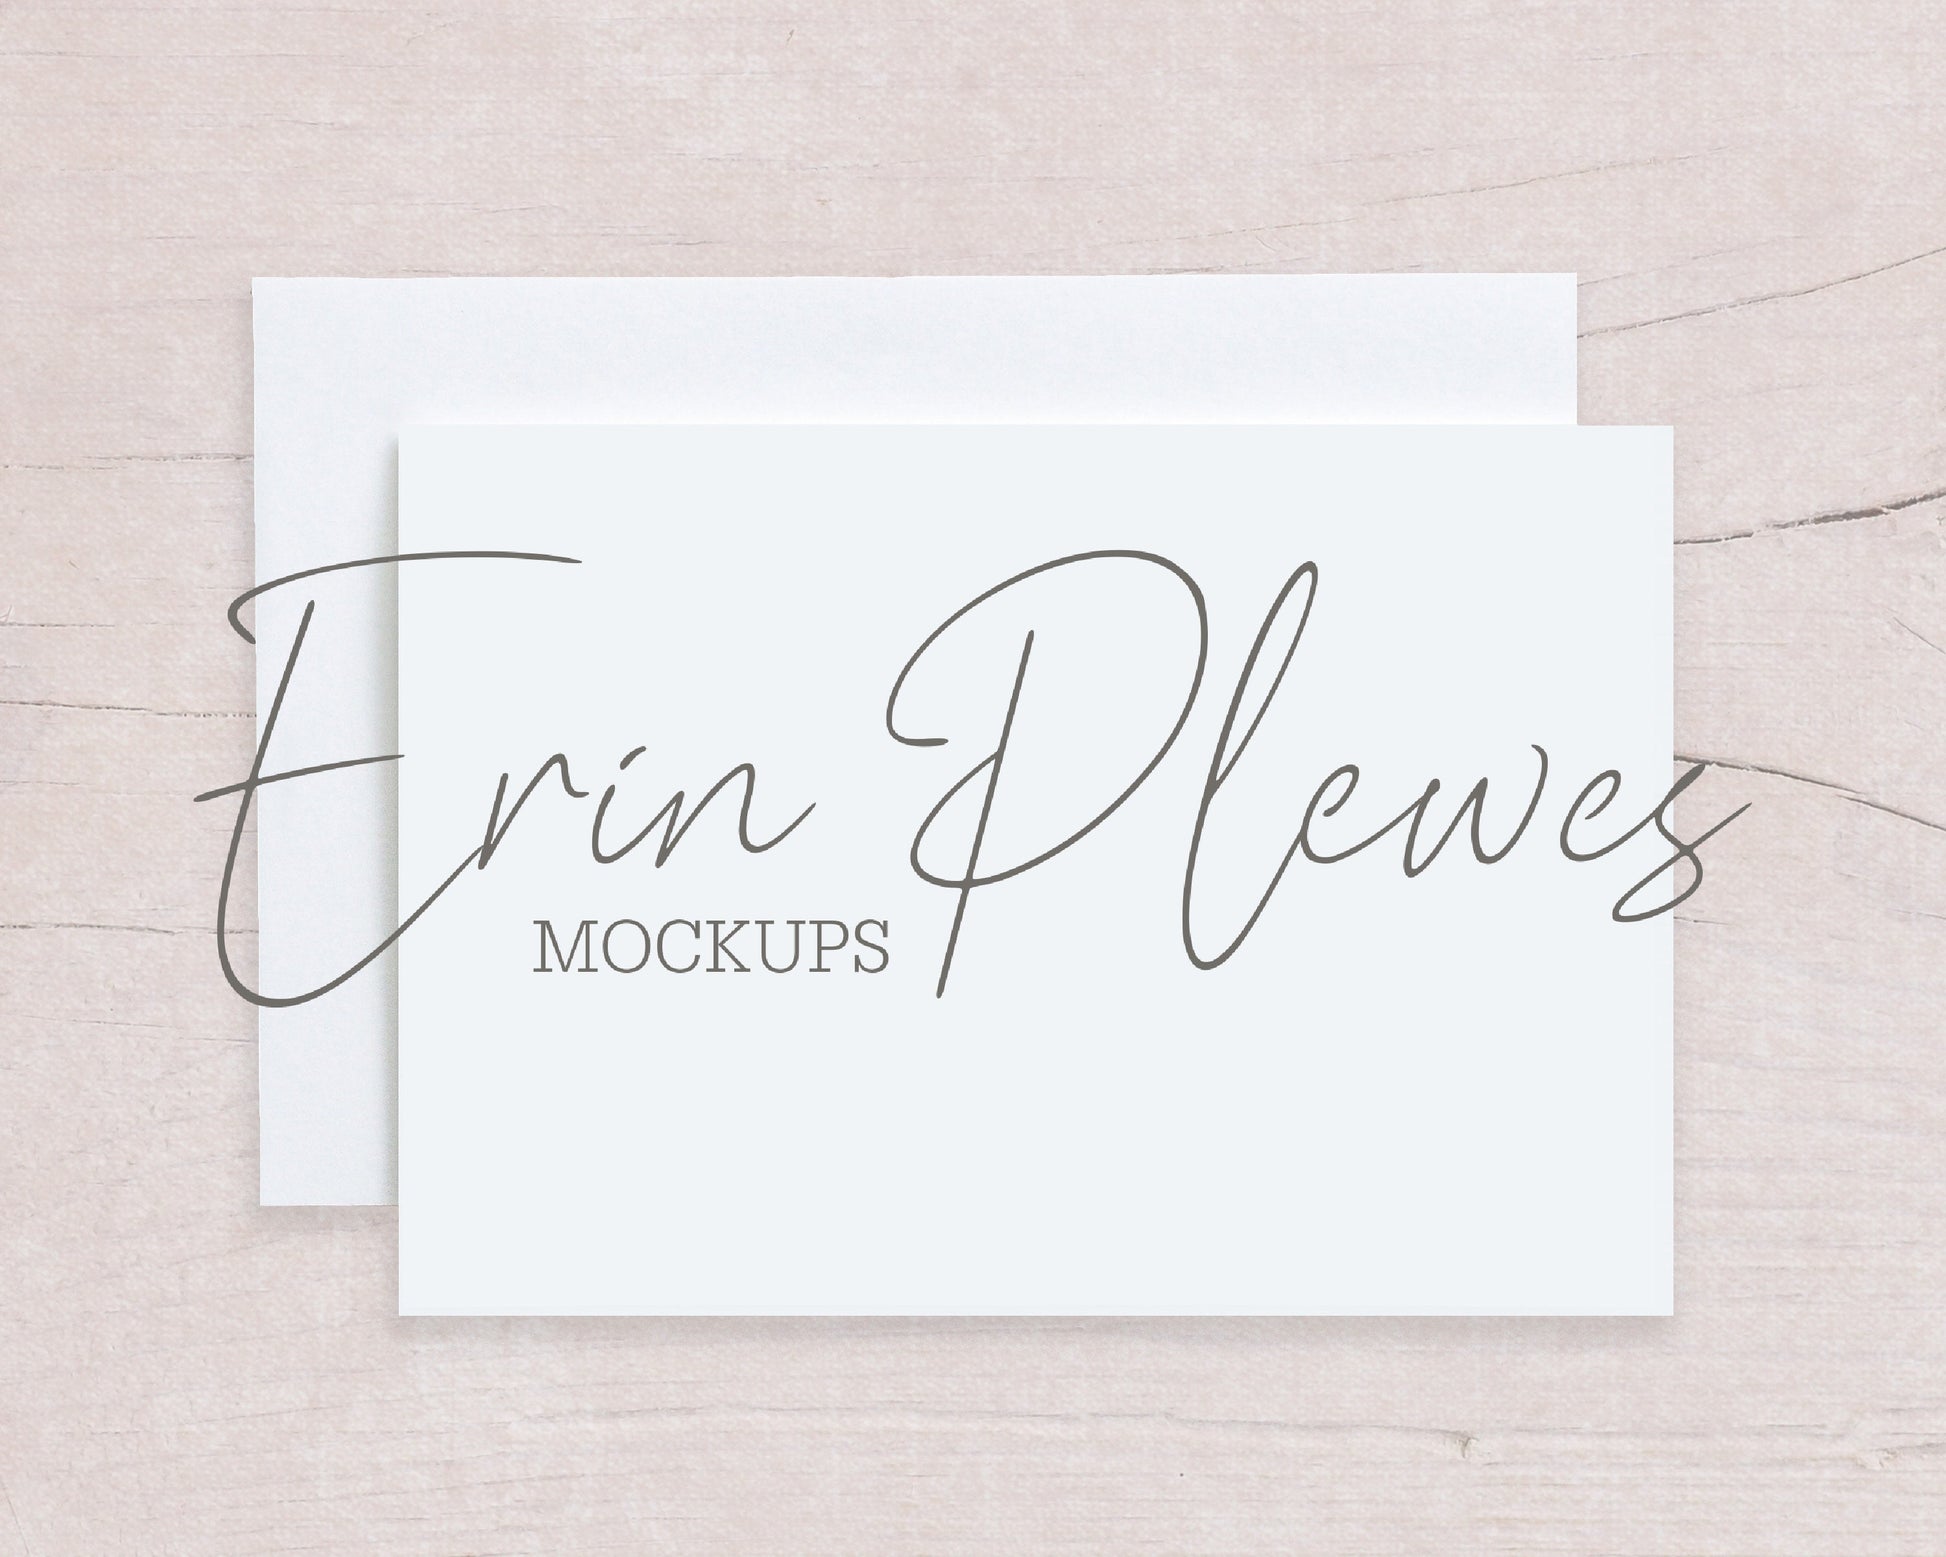 A5 Card Mock Up with White Envelope on Beige Wood, Stationery Mockup, Flat Lay for Rustic Wedding, Jpeg Instant Digital Download